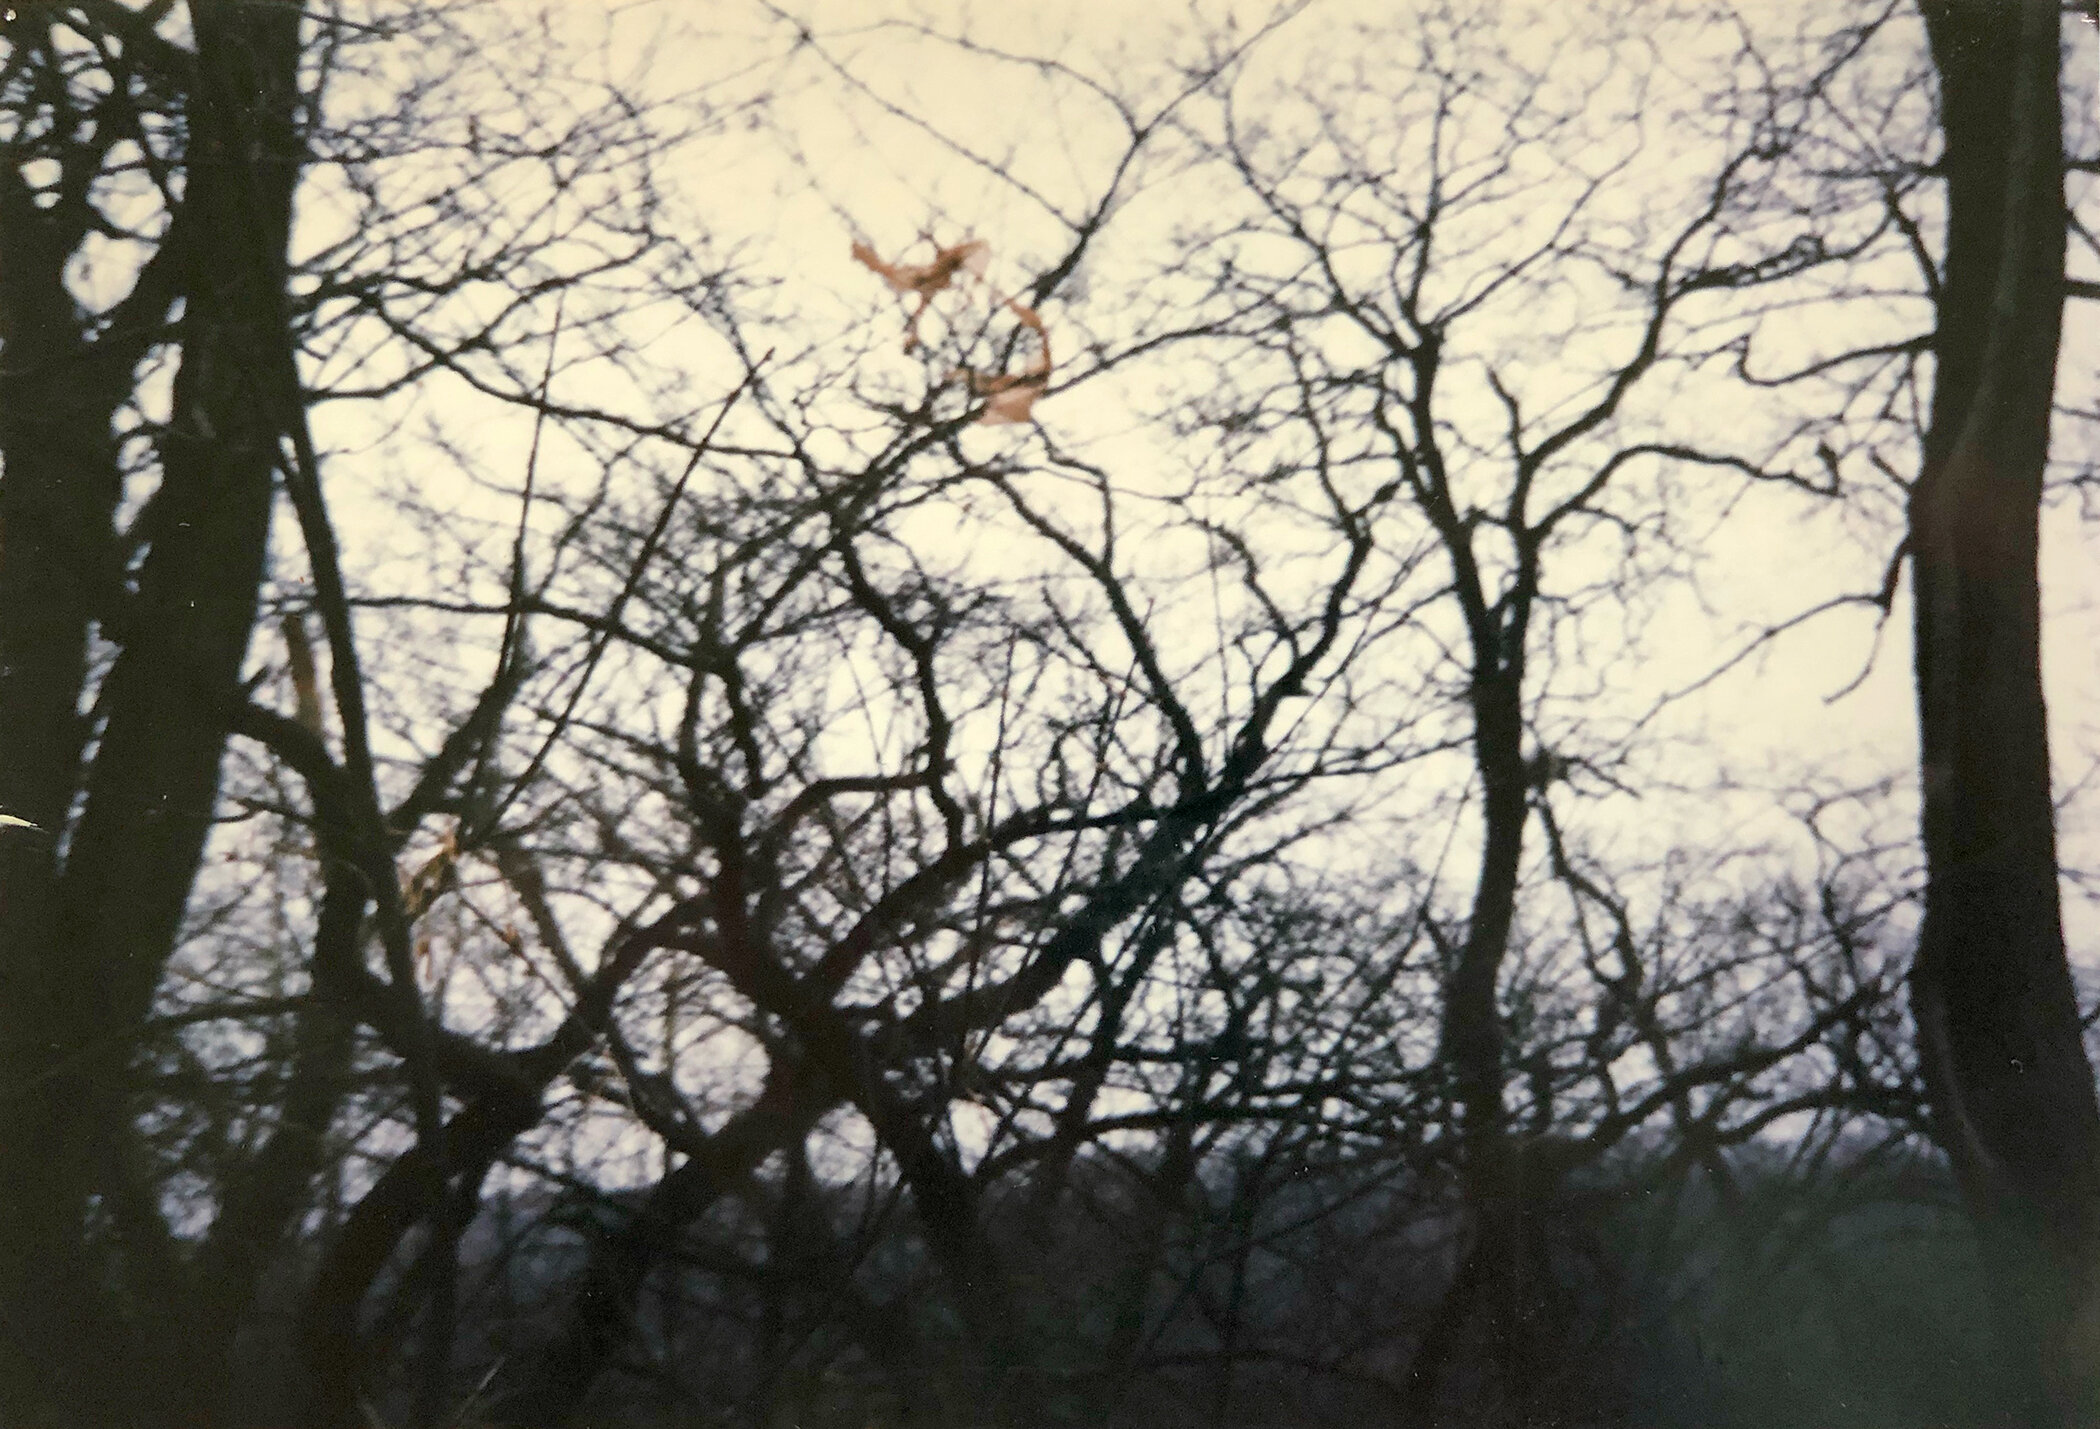 Dark, bare tree branches against a cloudy sky, shredded brown plastic bag caught in the branches.